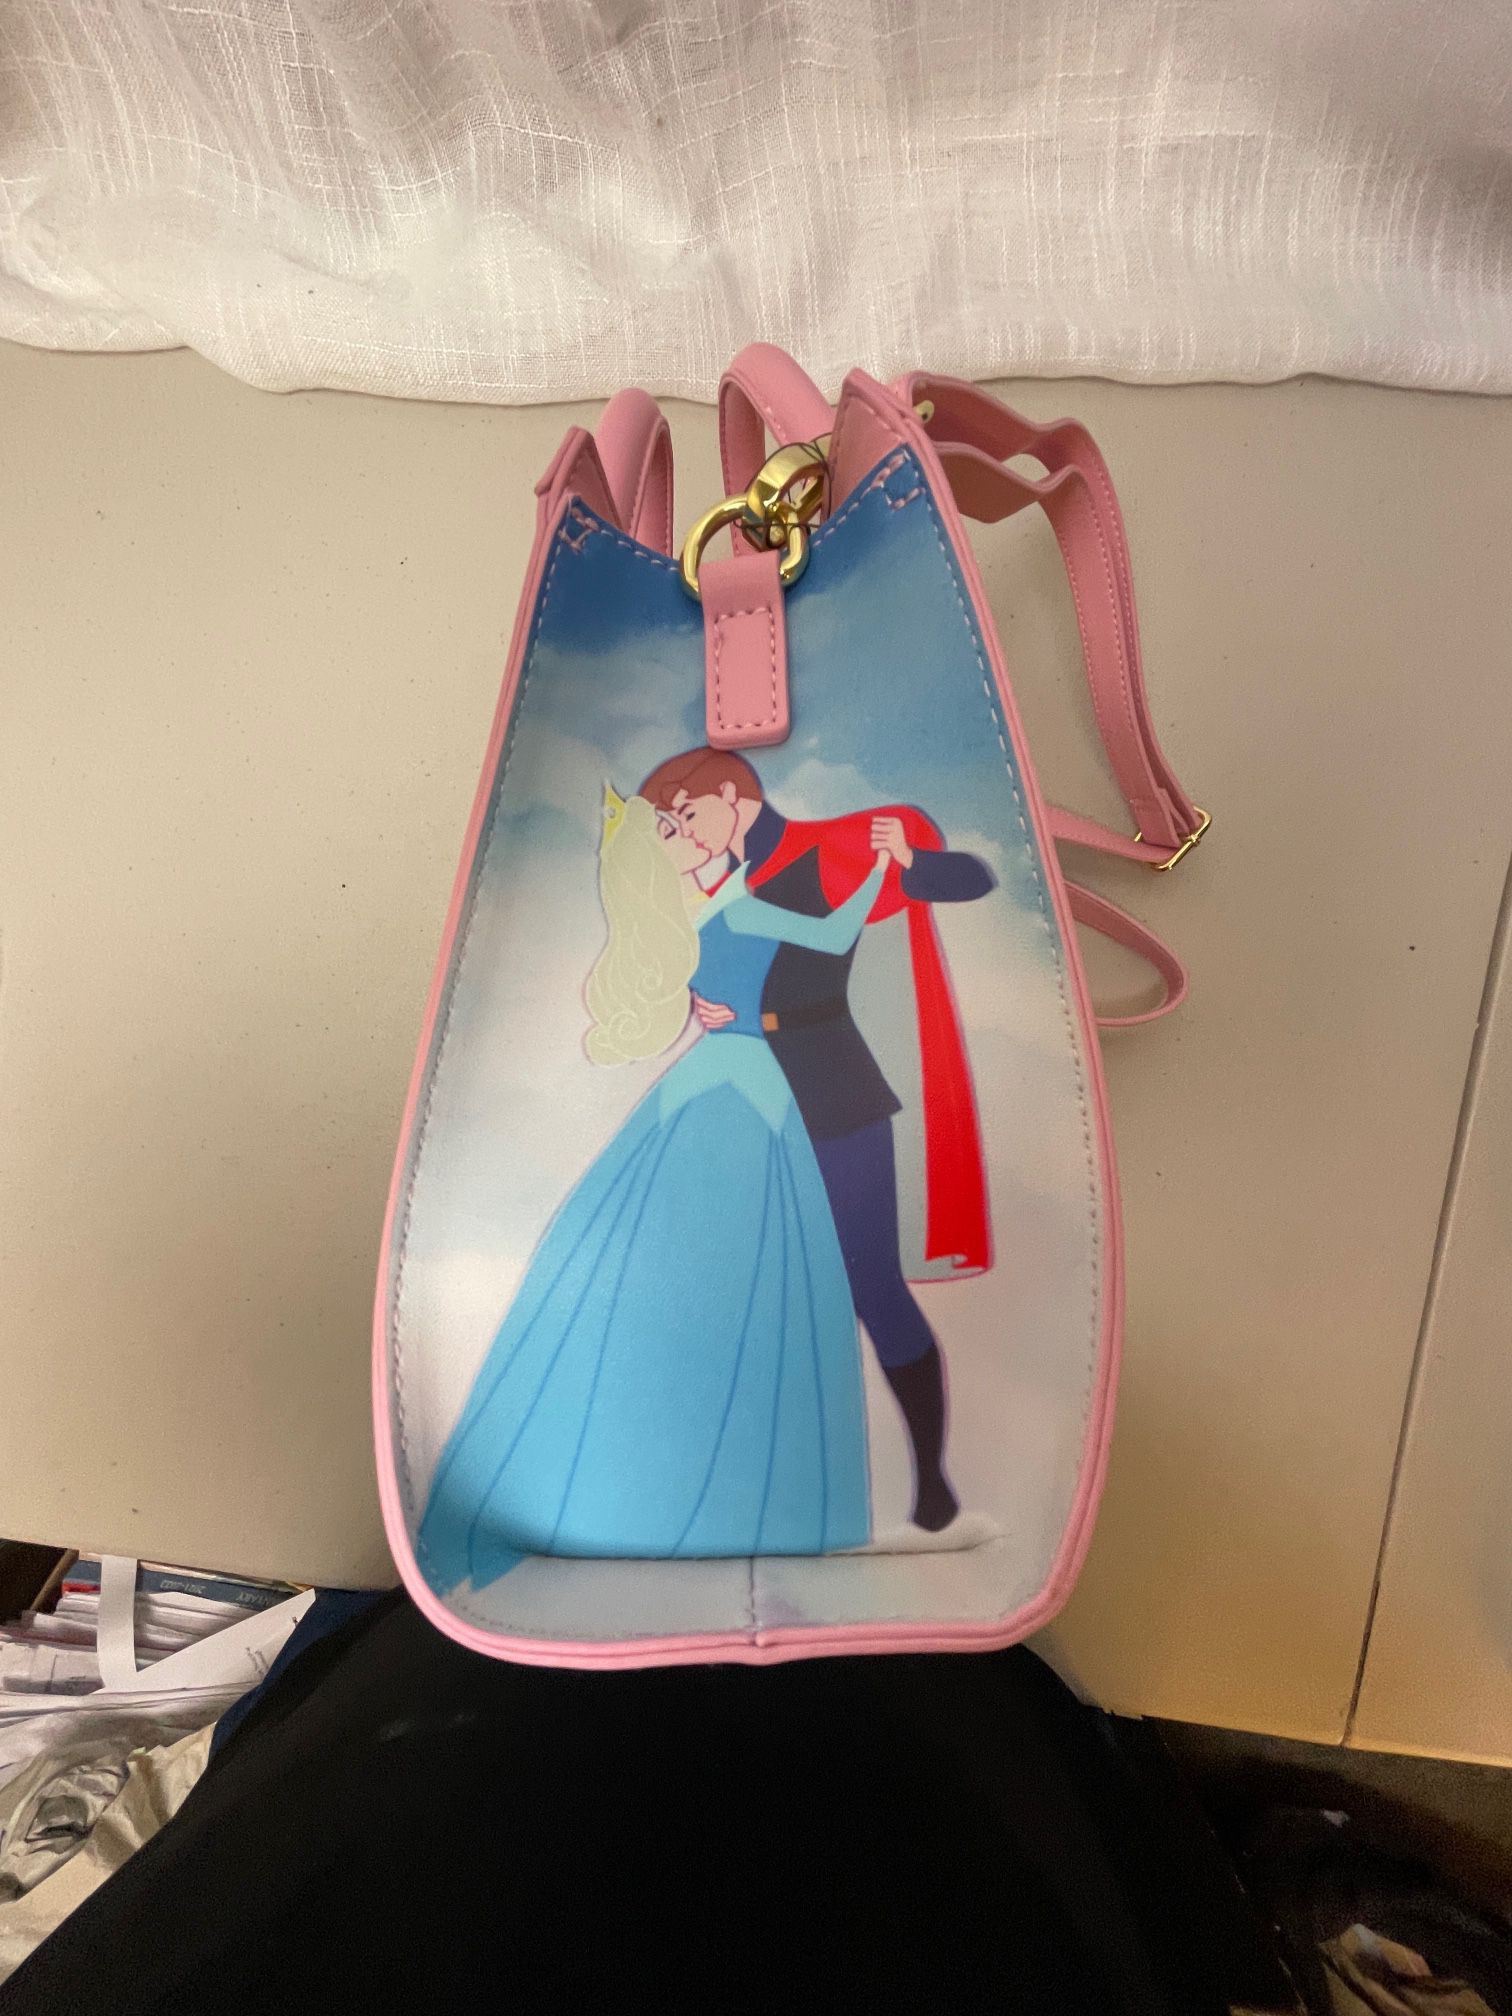 Disney Loungefly SLEEPING BEAUTY (1959) - SCENES - 7 FAUX LEATHER CROSSBODY  BAG for Sale in Laguna Niguel, CA - OfferUp